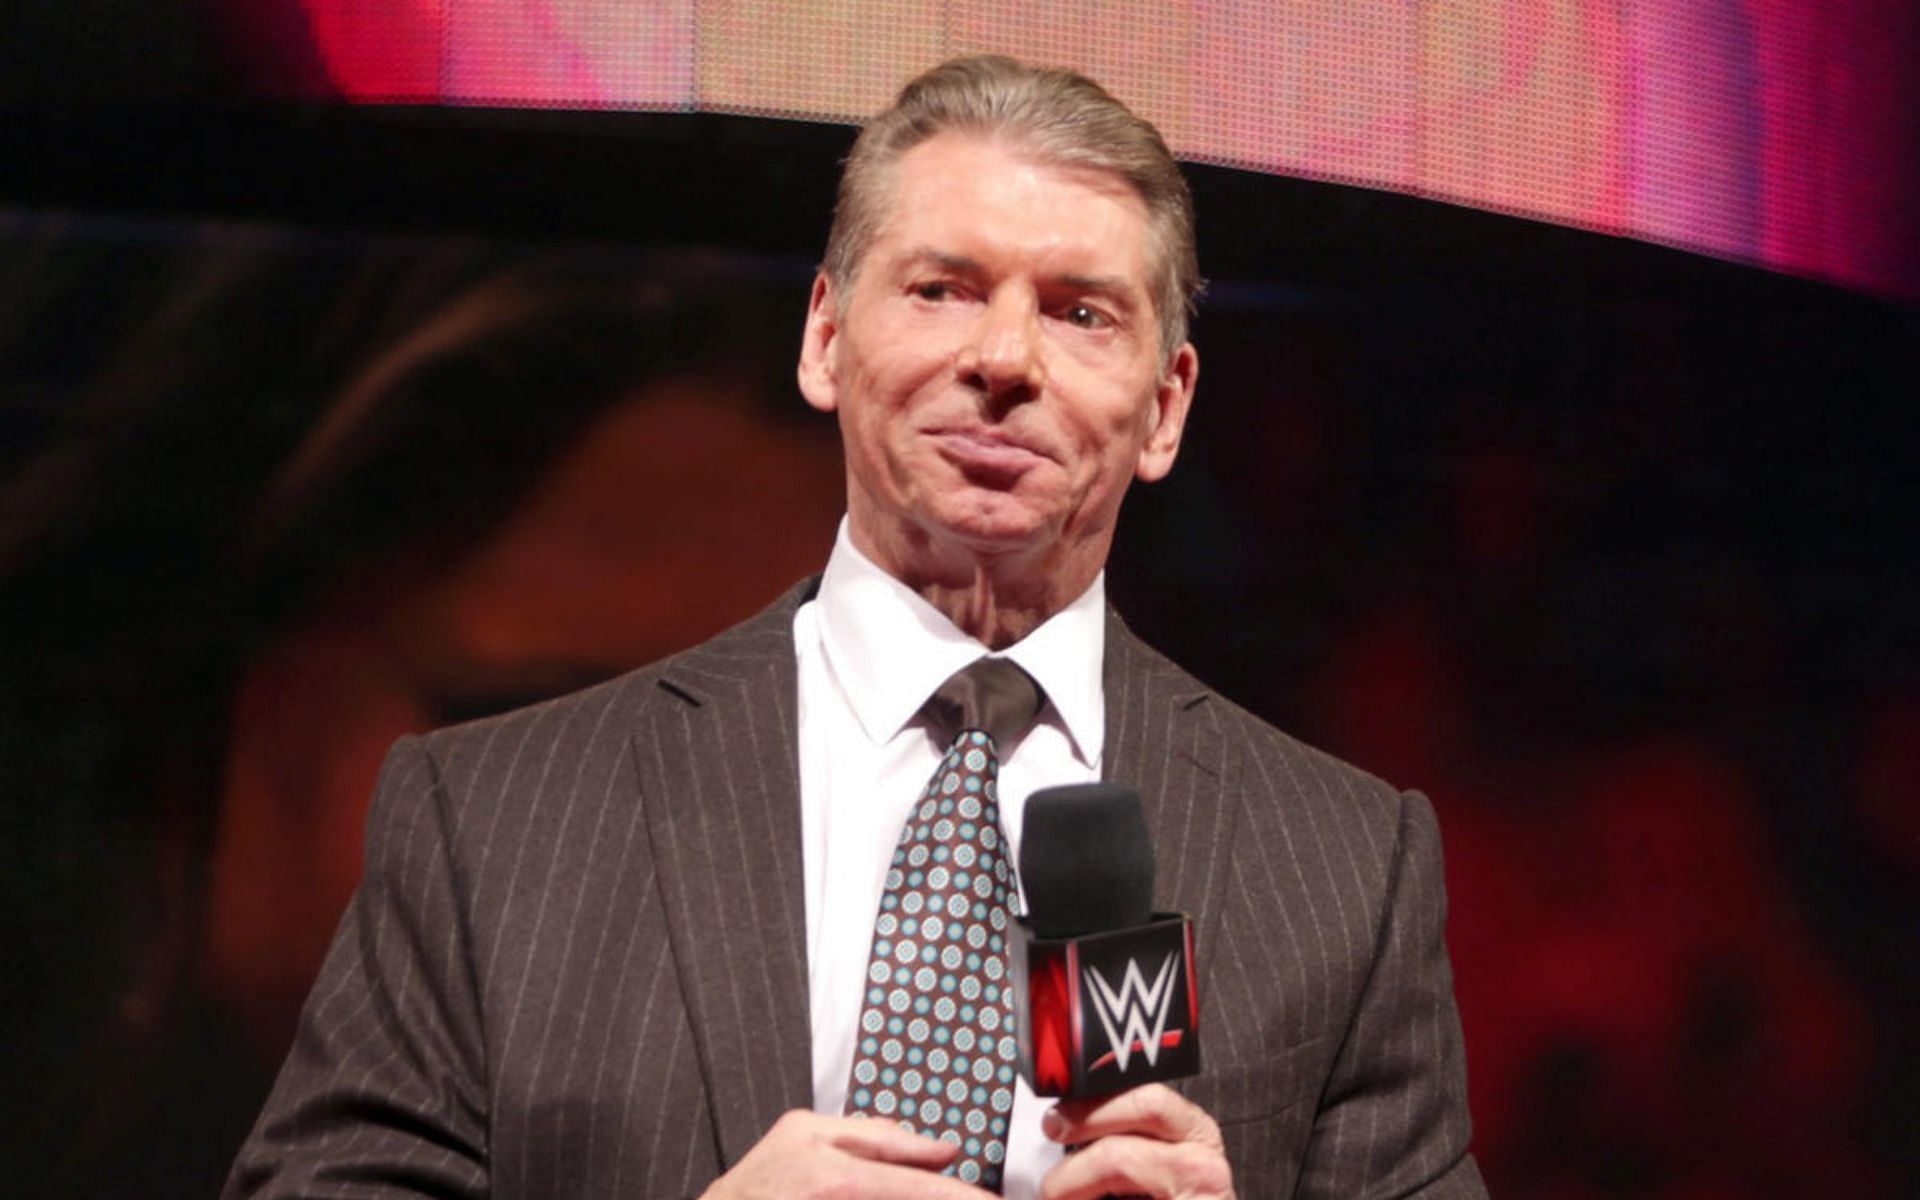 Vince McMahon retired at the age of 77!